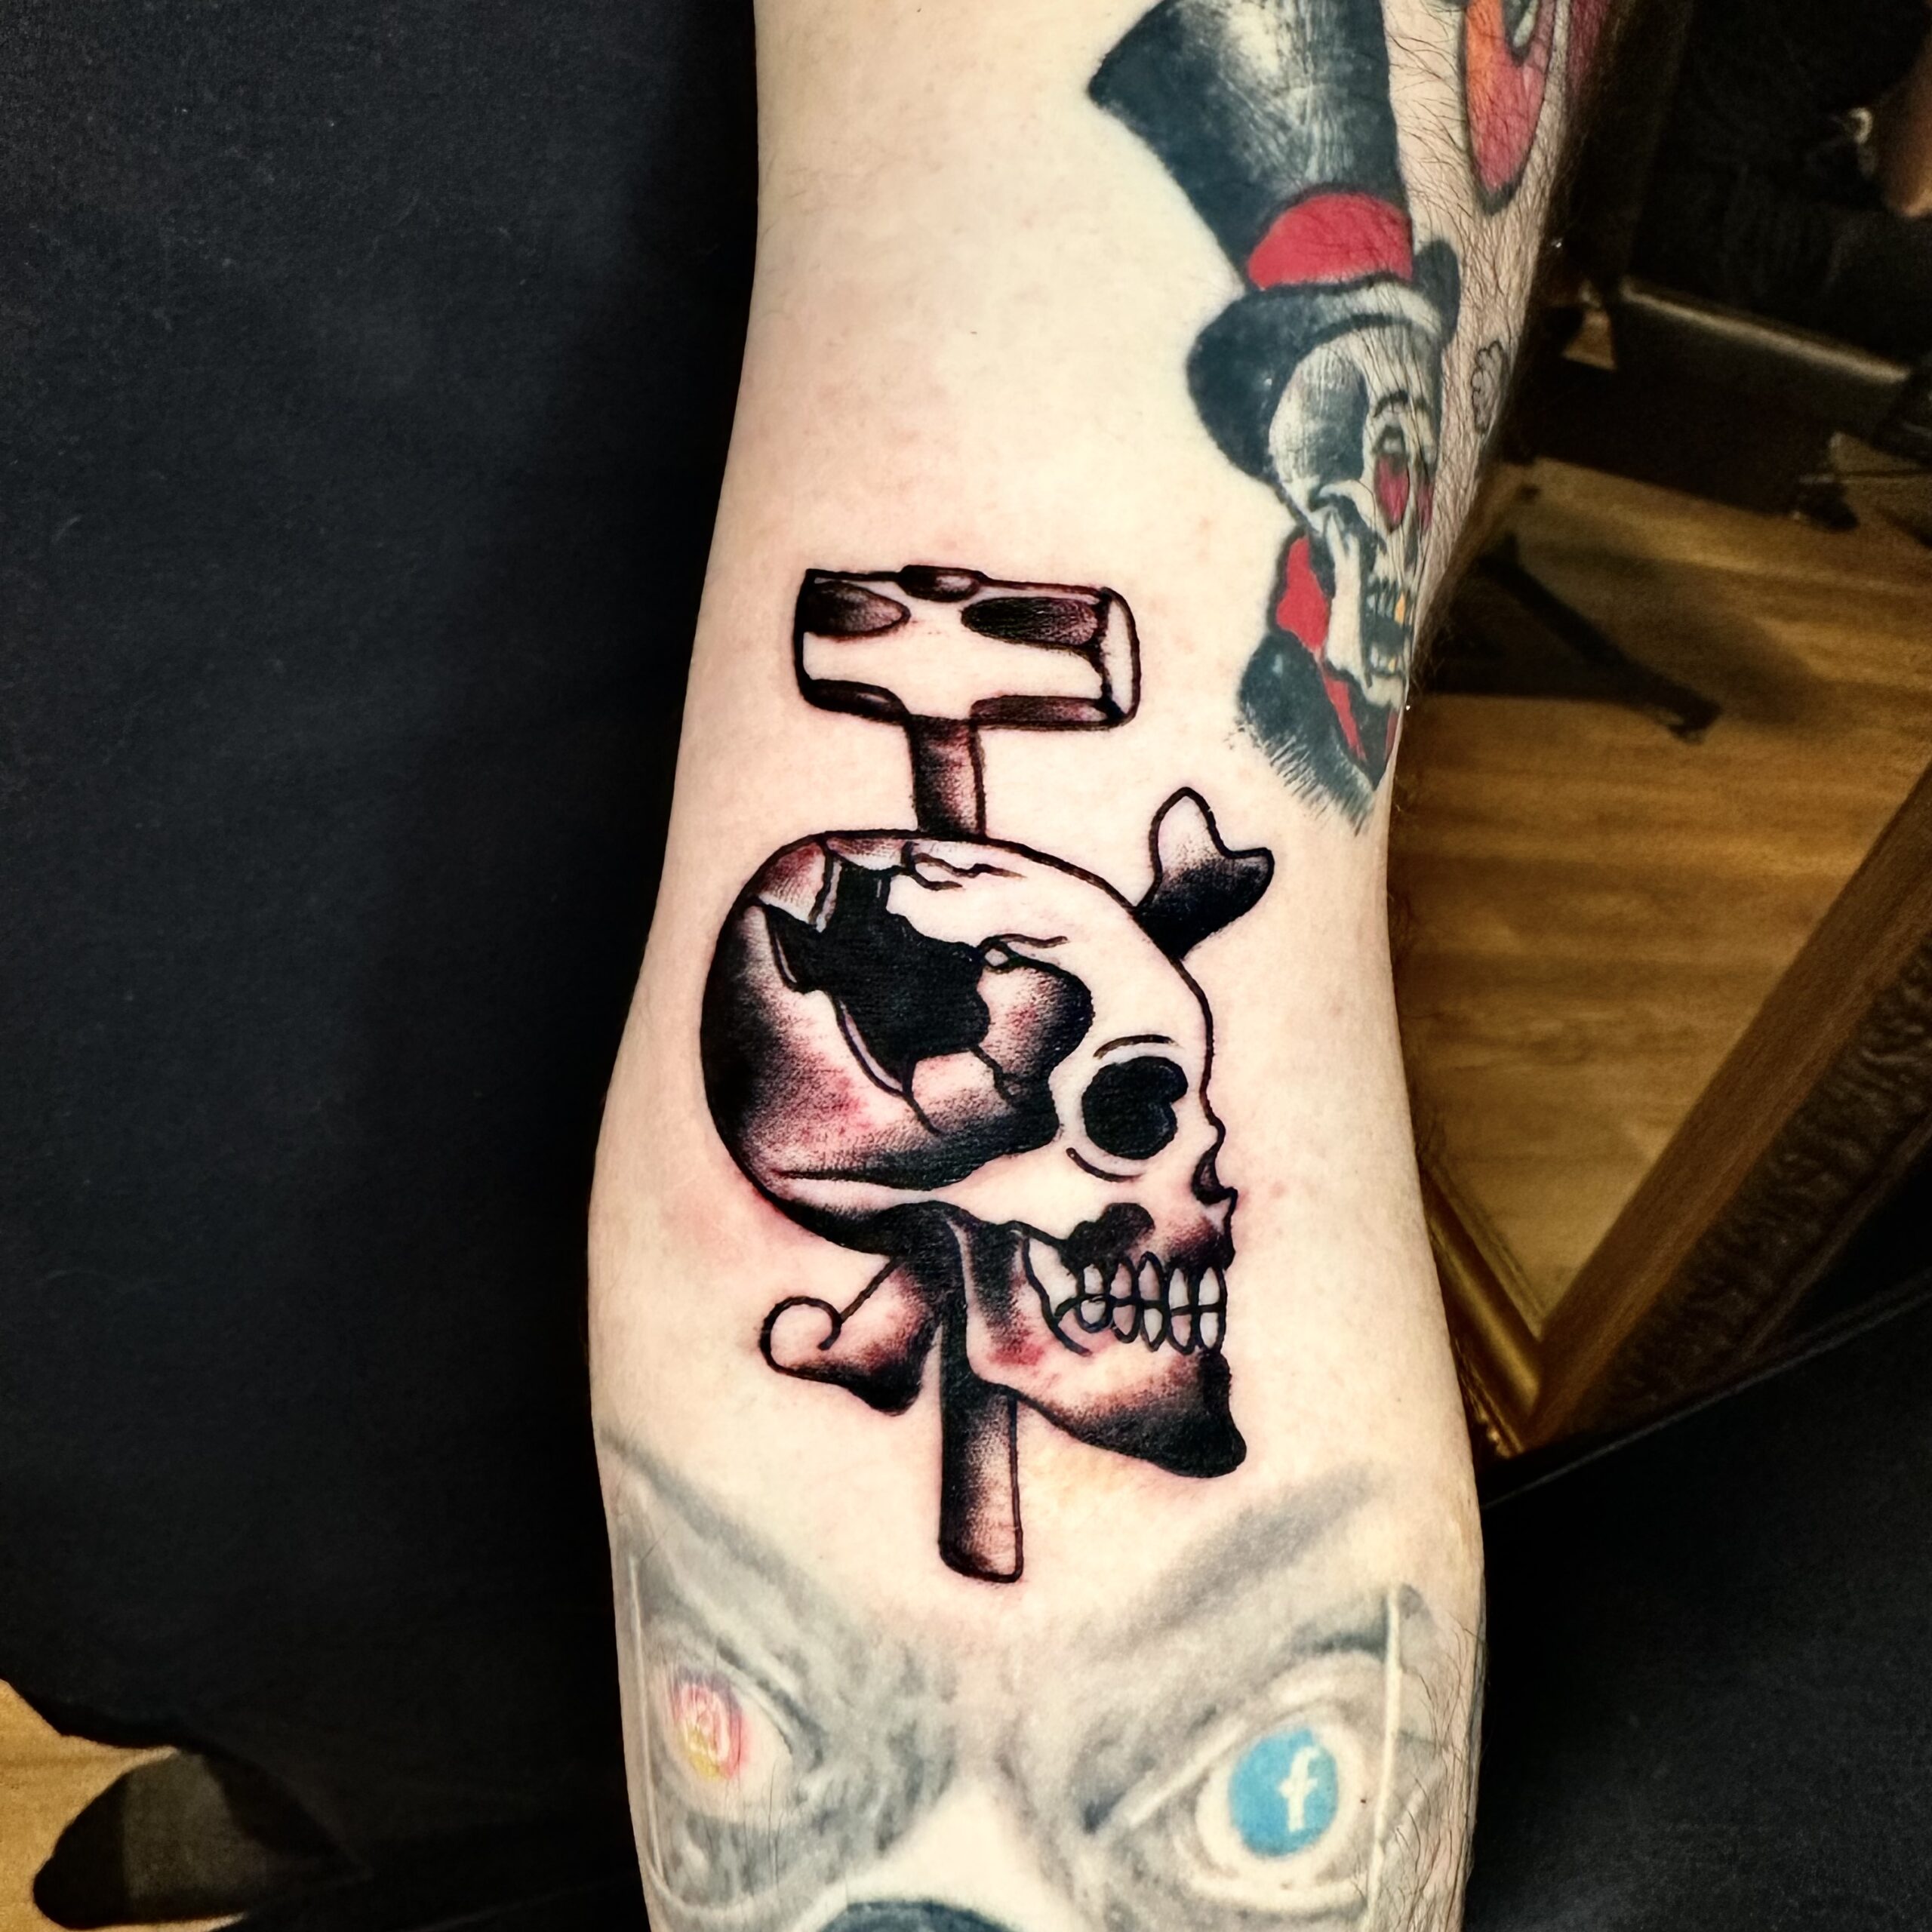 Tattoo of a skull and hammer from a Dallas tattoo shop